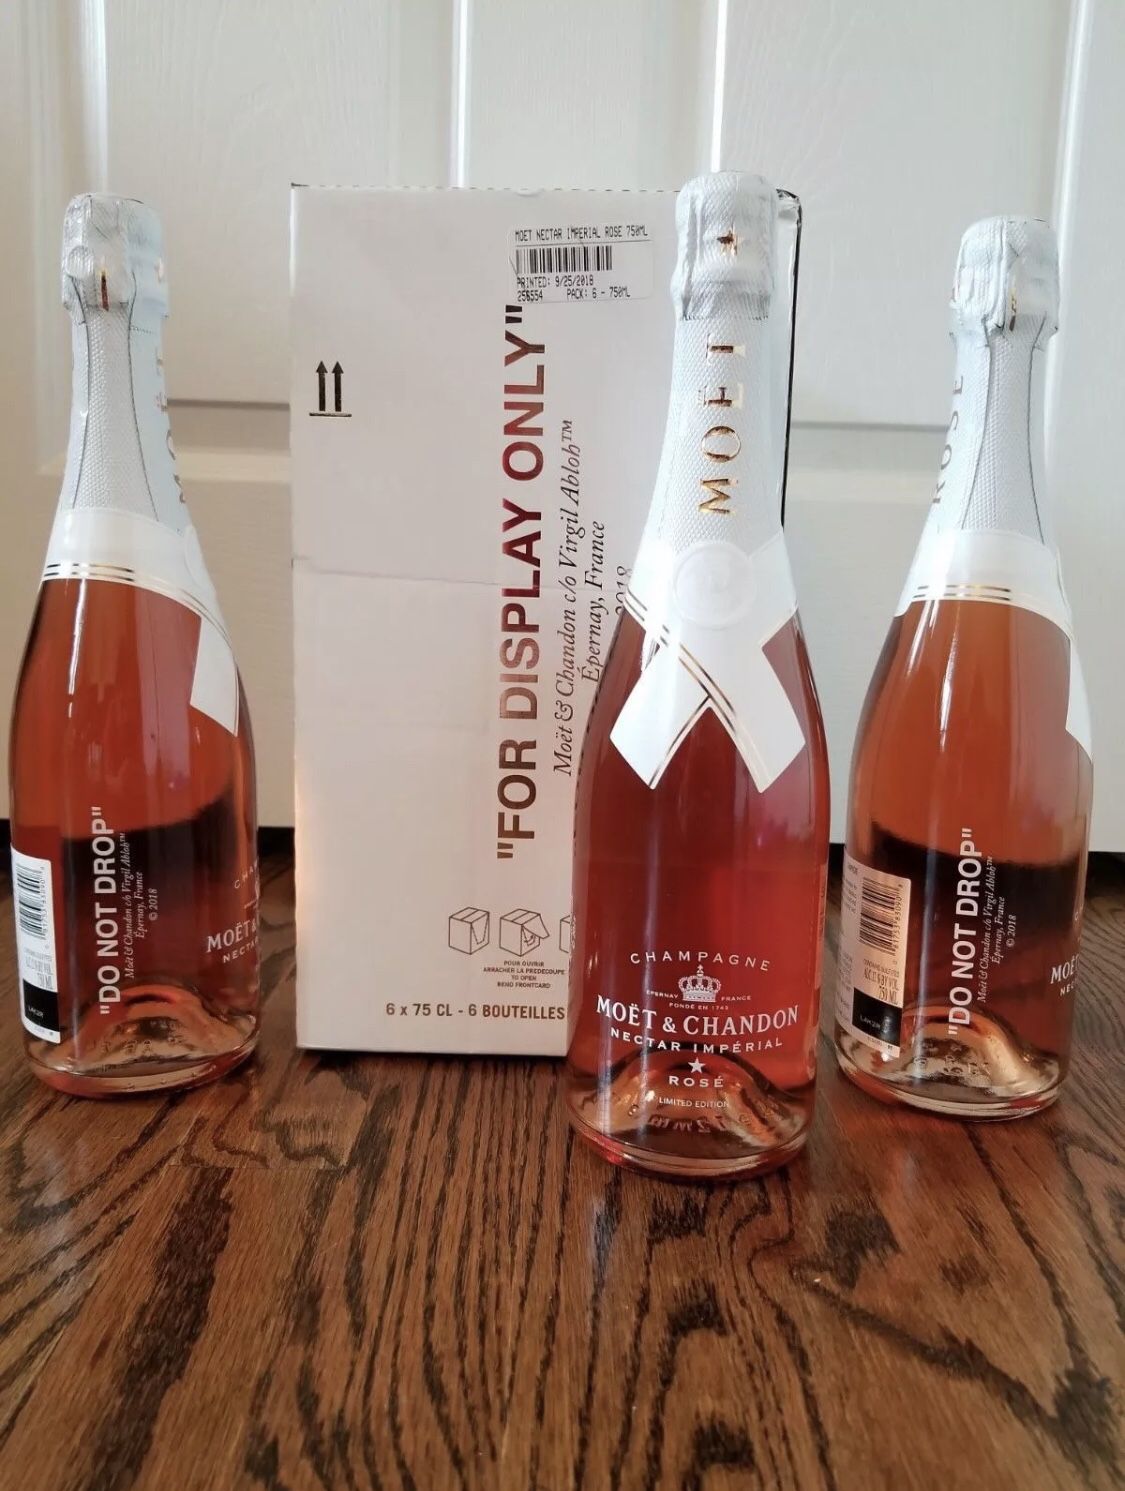 Moet & Chandon x Off White Limited Nectar Imperial Rose Virgil Abloh *IN  HAND*